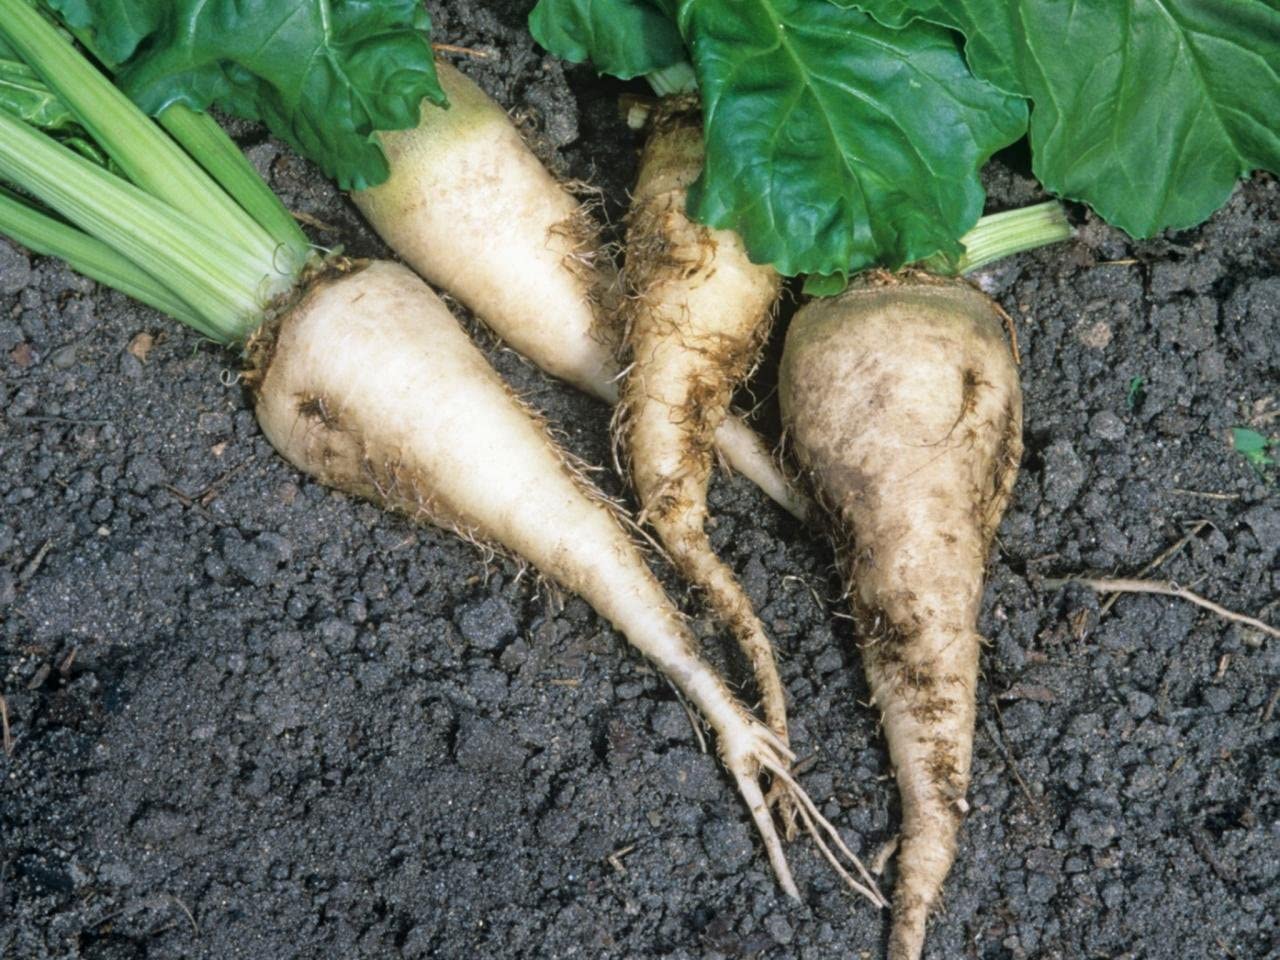 Sugar Beets, 100 Heirloom Seeds Per Packet, Non GMO Seeds